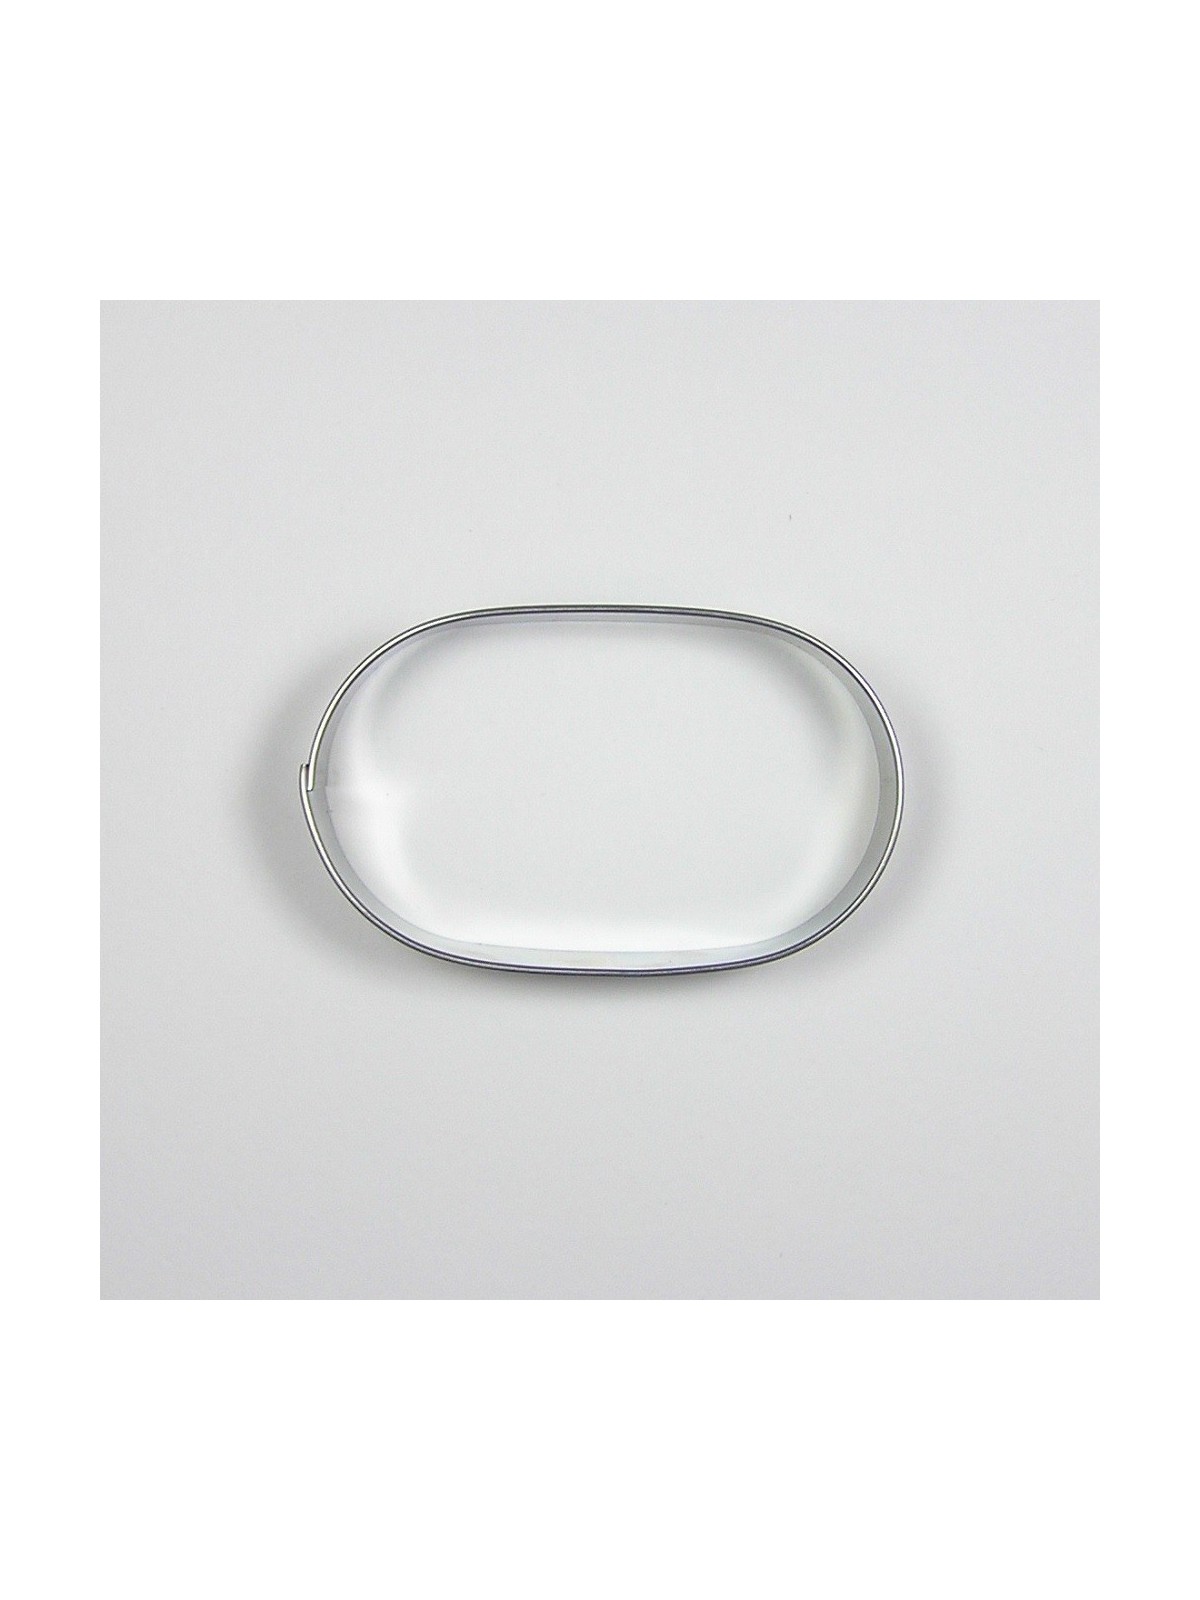 Stainless steel cutter - mocca oval 5 cm